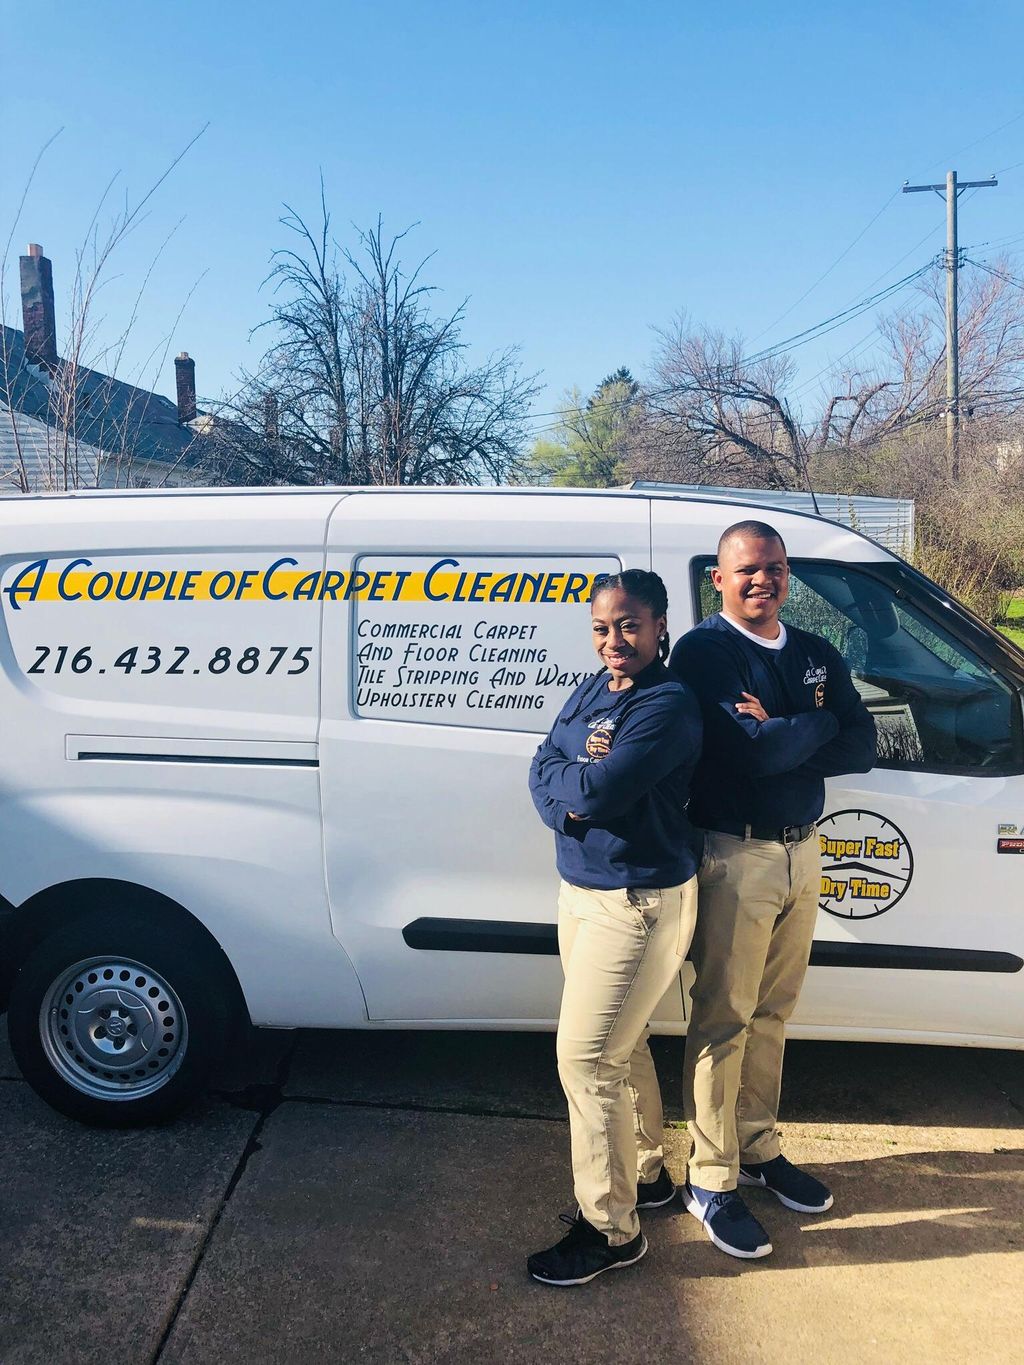 A Couple of Carpet Cleaners LLC